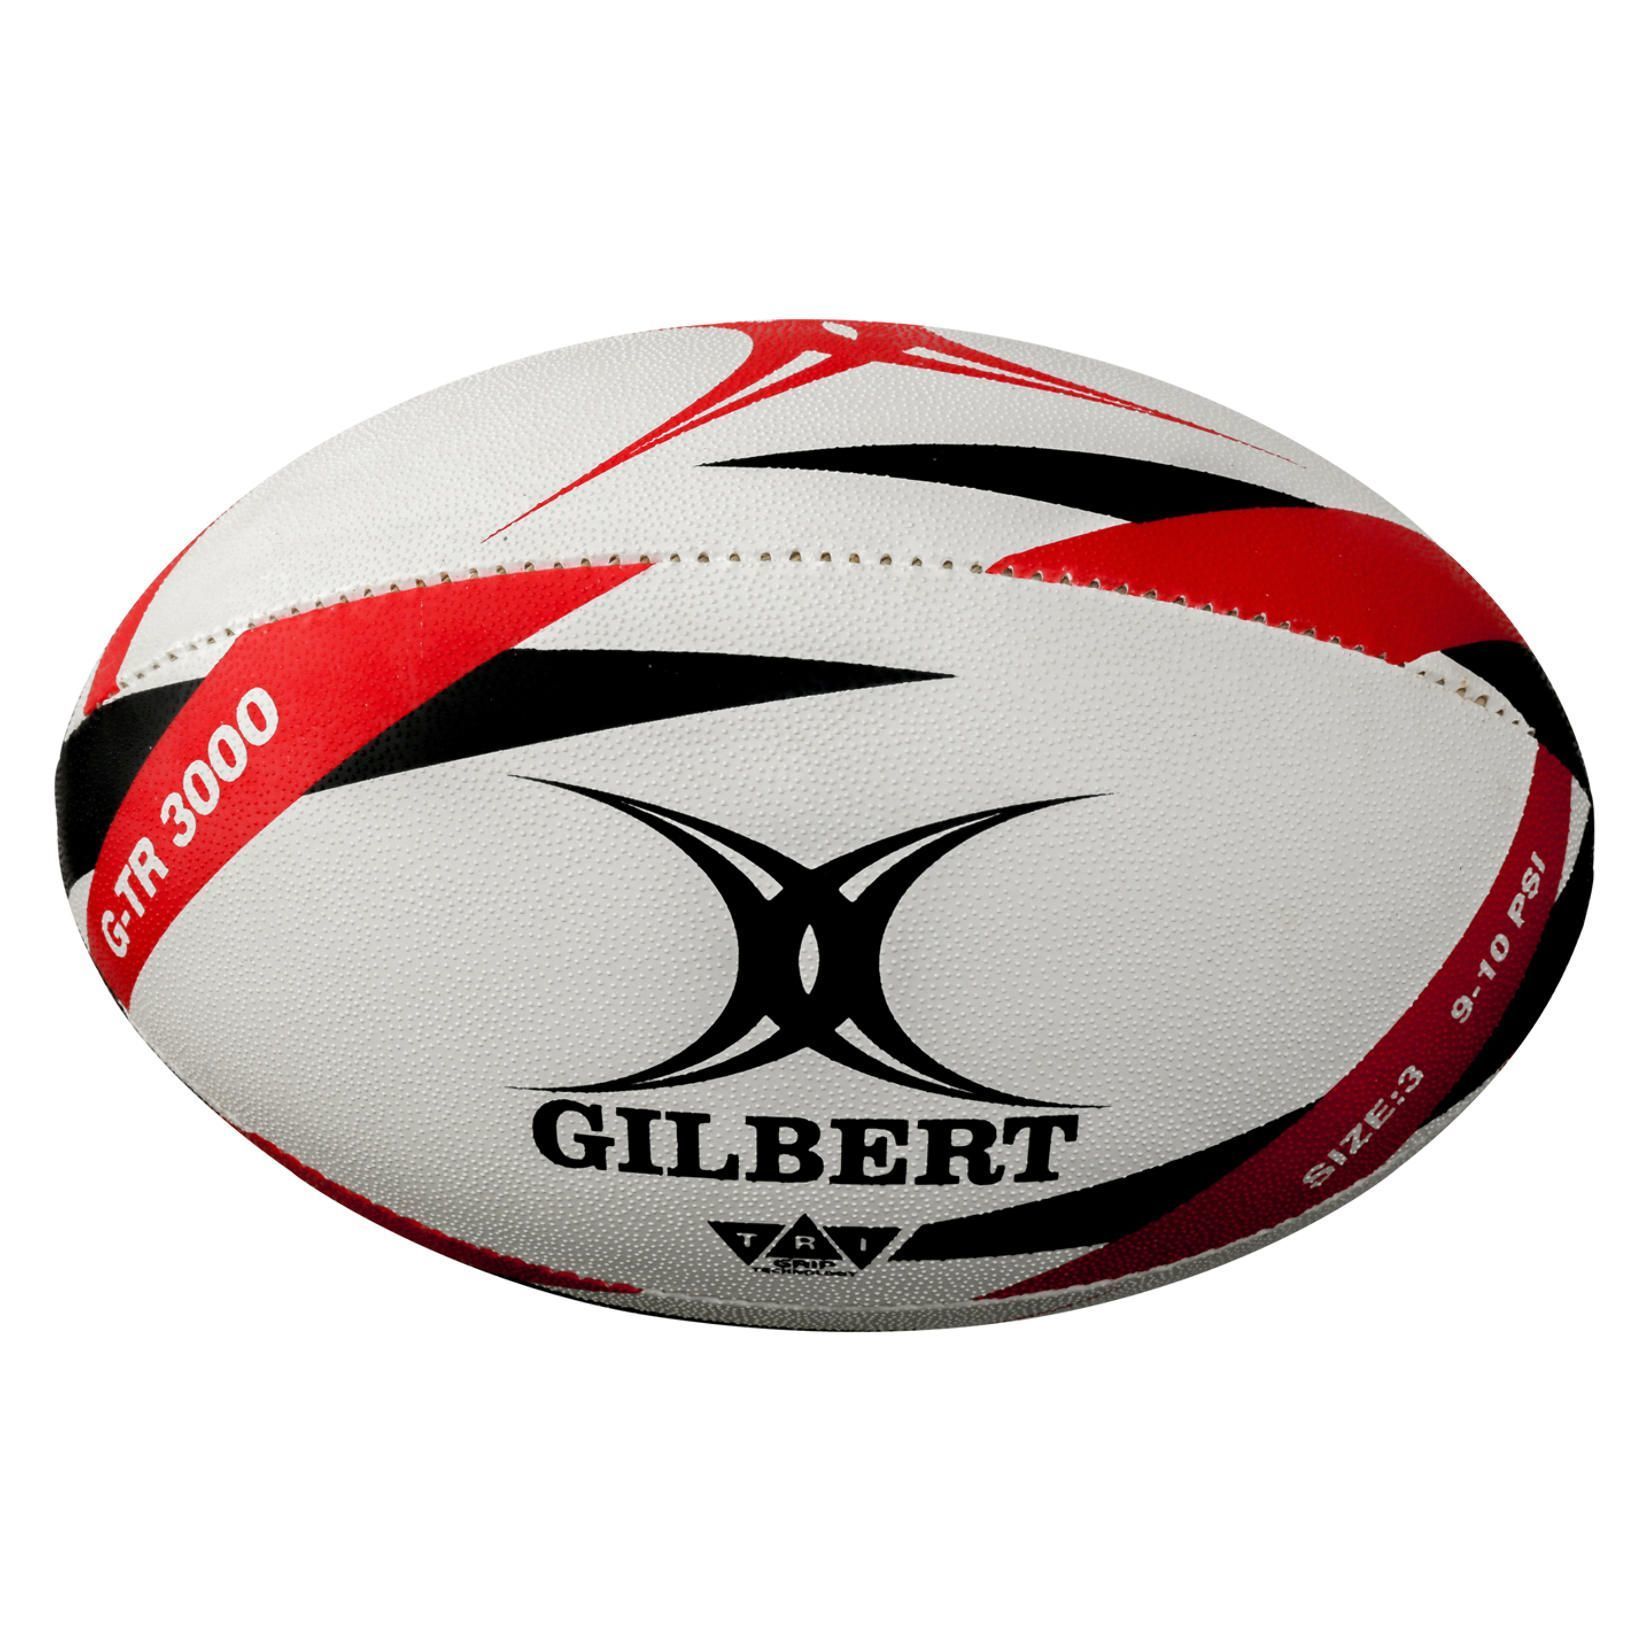 Gilbert G-tr3000 Trainer Ball Size 3 Red (30 Pack)